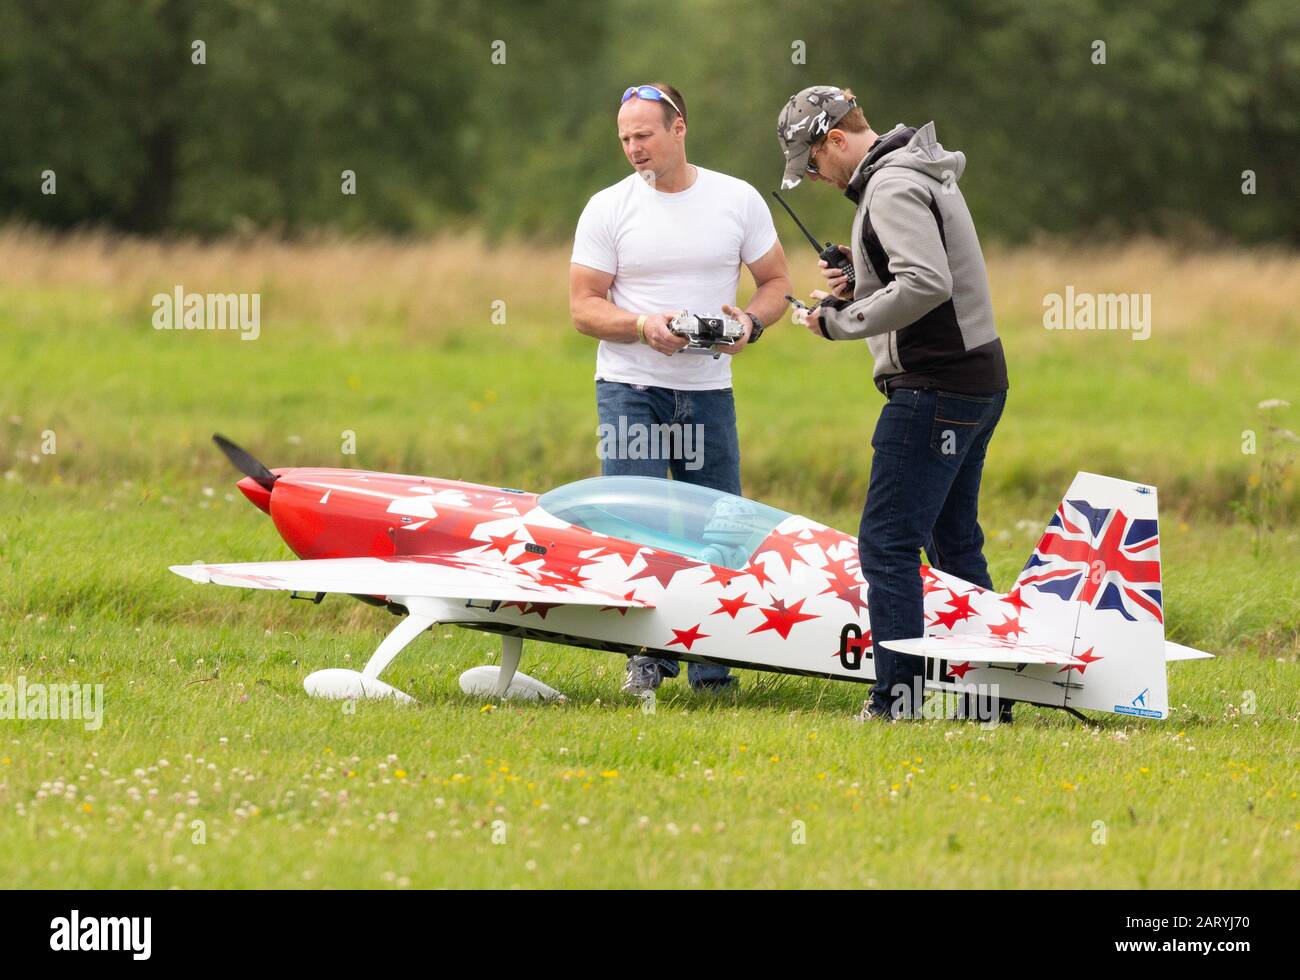 Two men with a radio controlled model aircraft Stock Photo